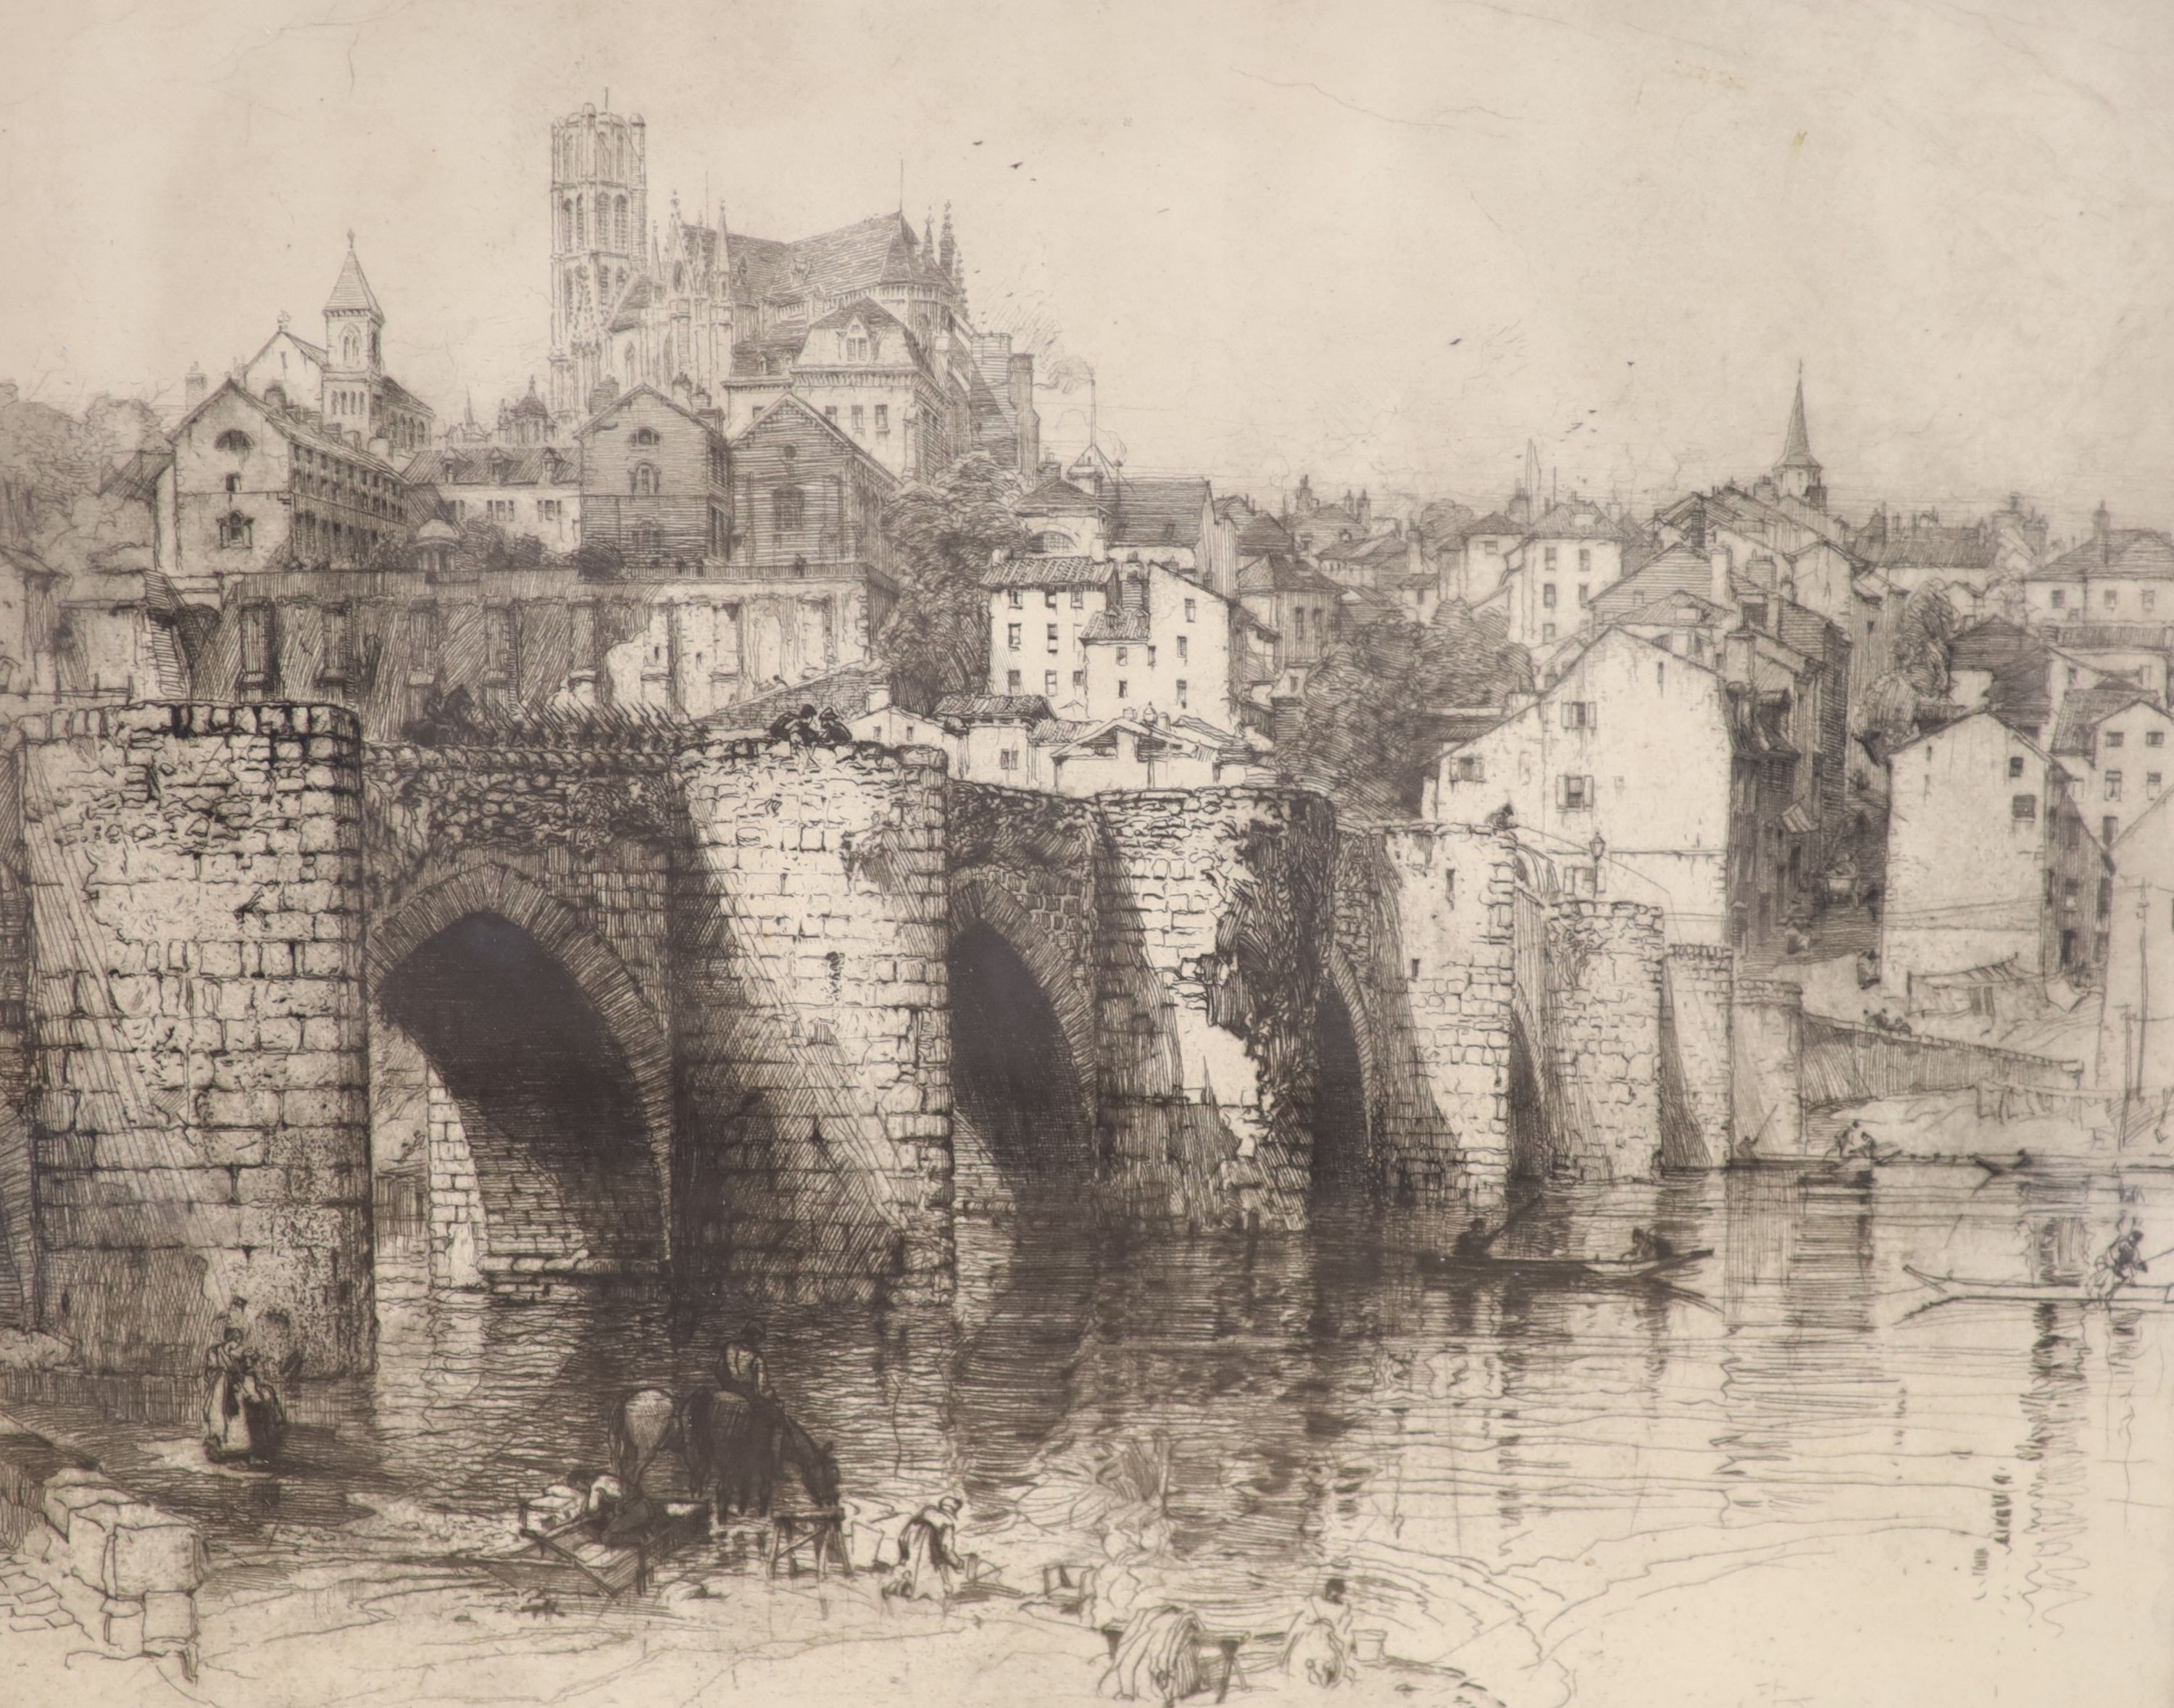 Hedley Fitton (1857-1929), etching, Pont St.Etienne, Limoges 1910, signed in pencil, 34 x 42cm.